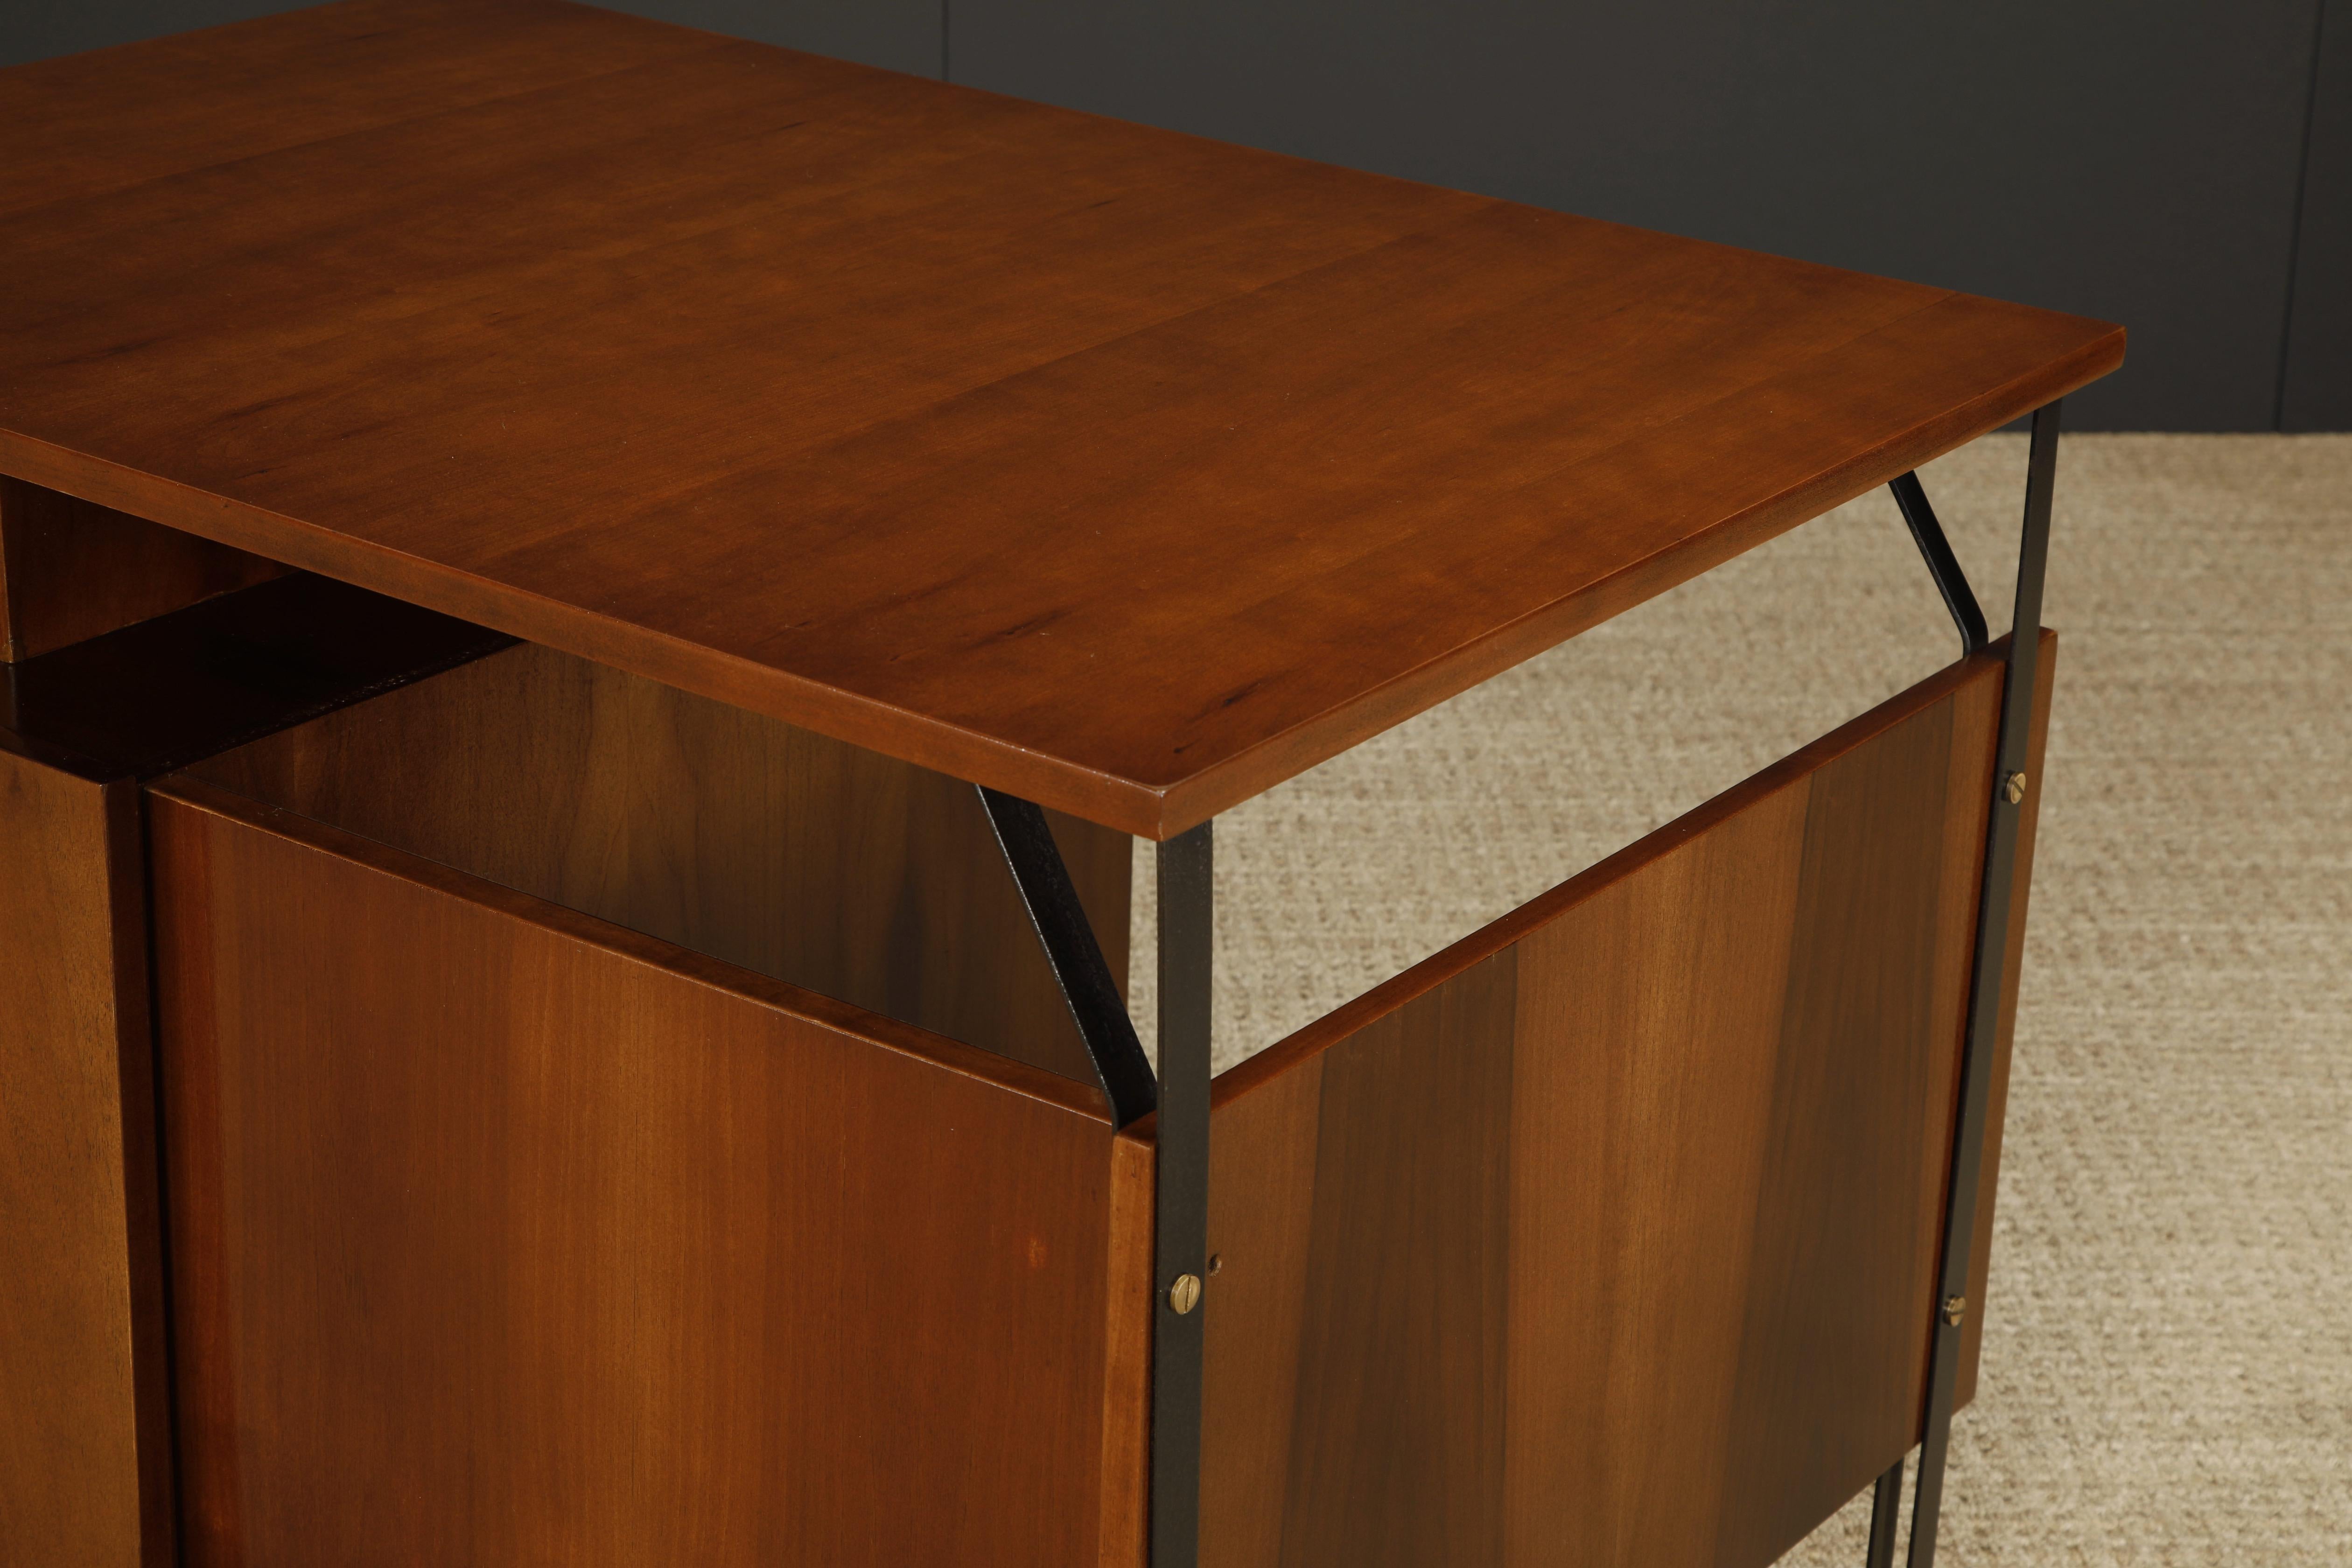 Italian Mid-Century Modern Desk, Style of Gio Ponti, c 1950s, Refinished For Sale 7